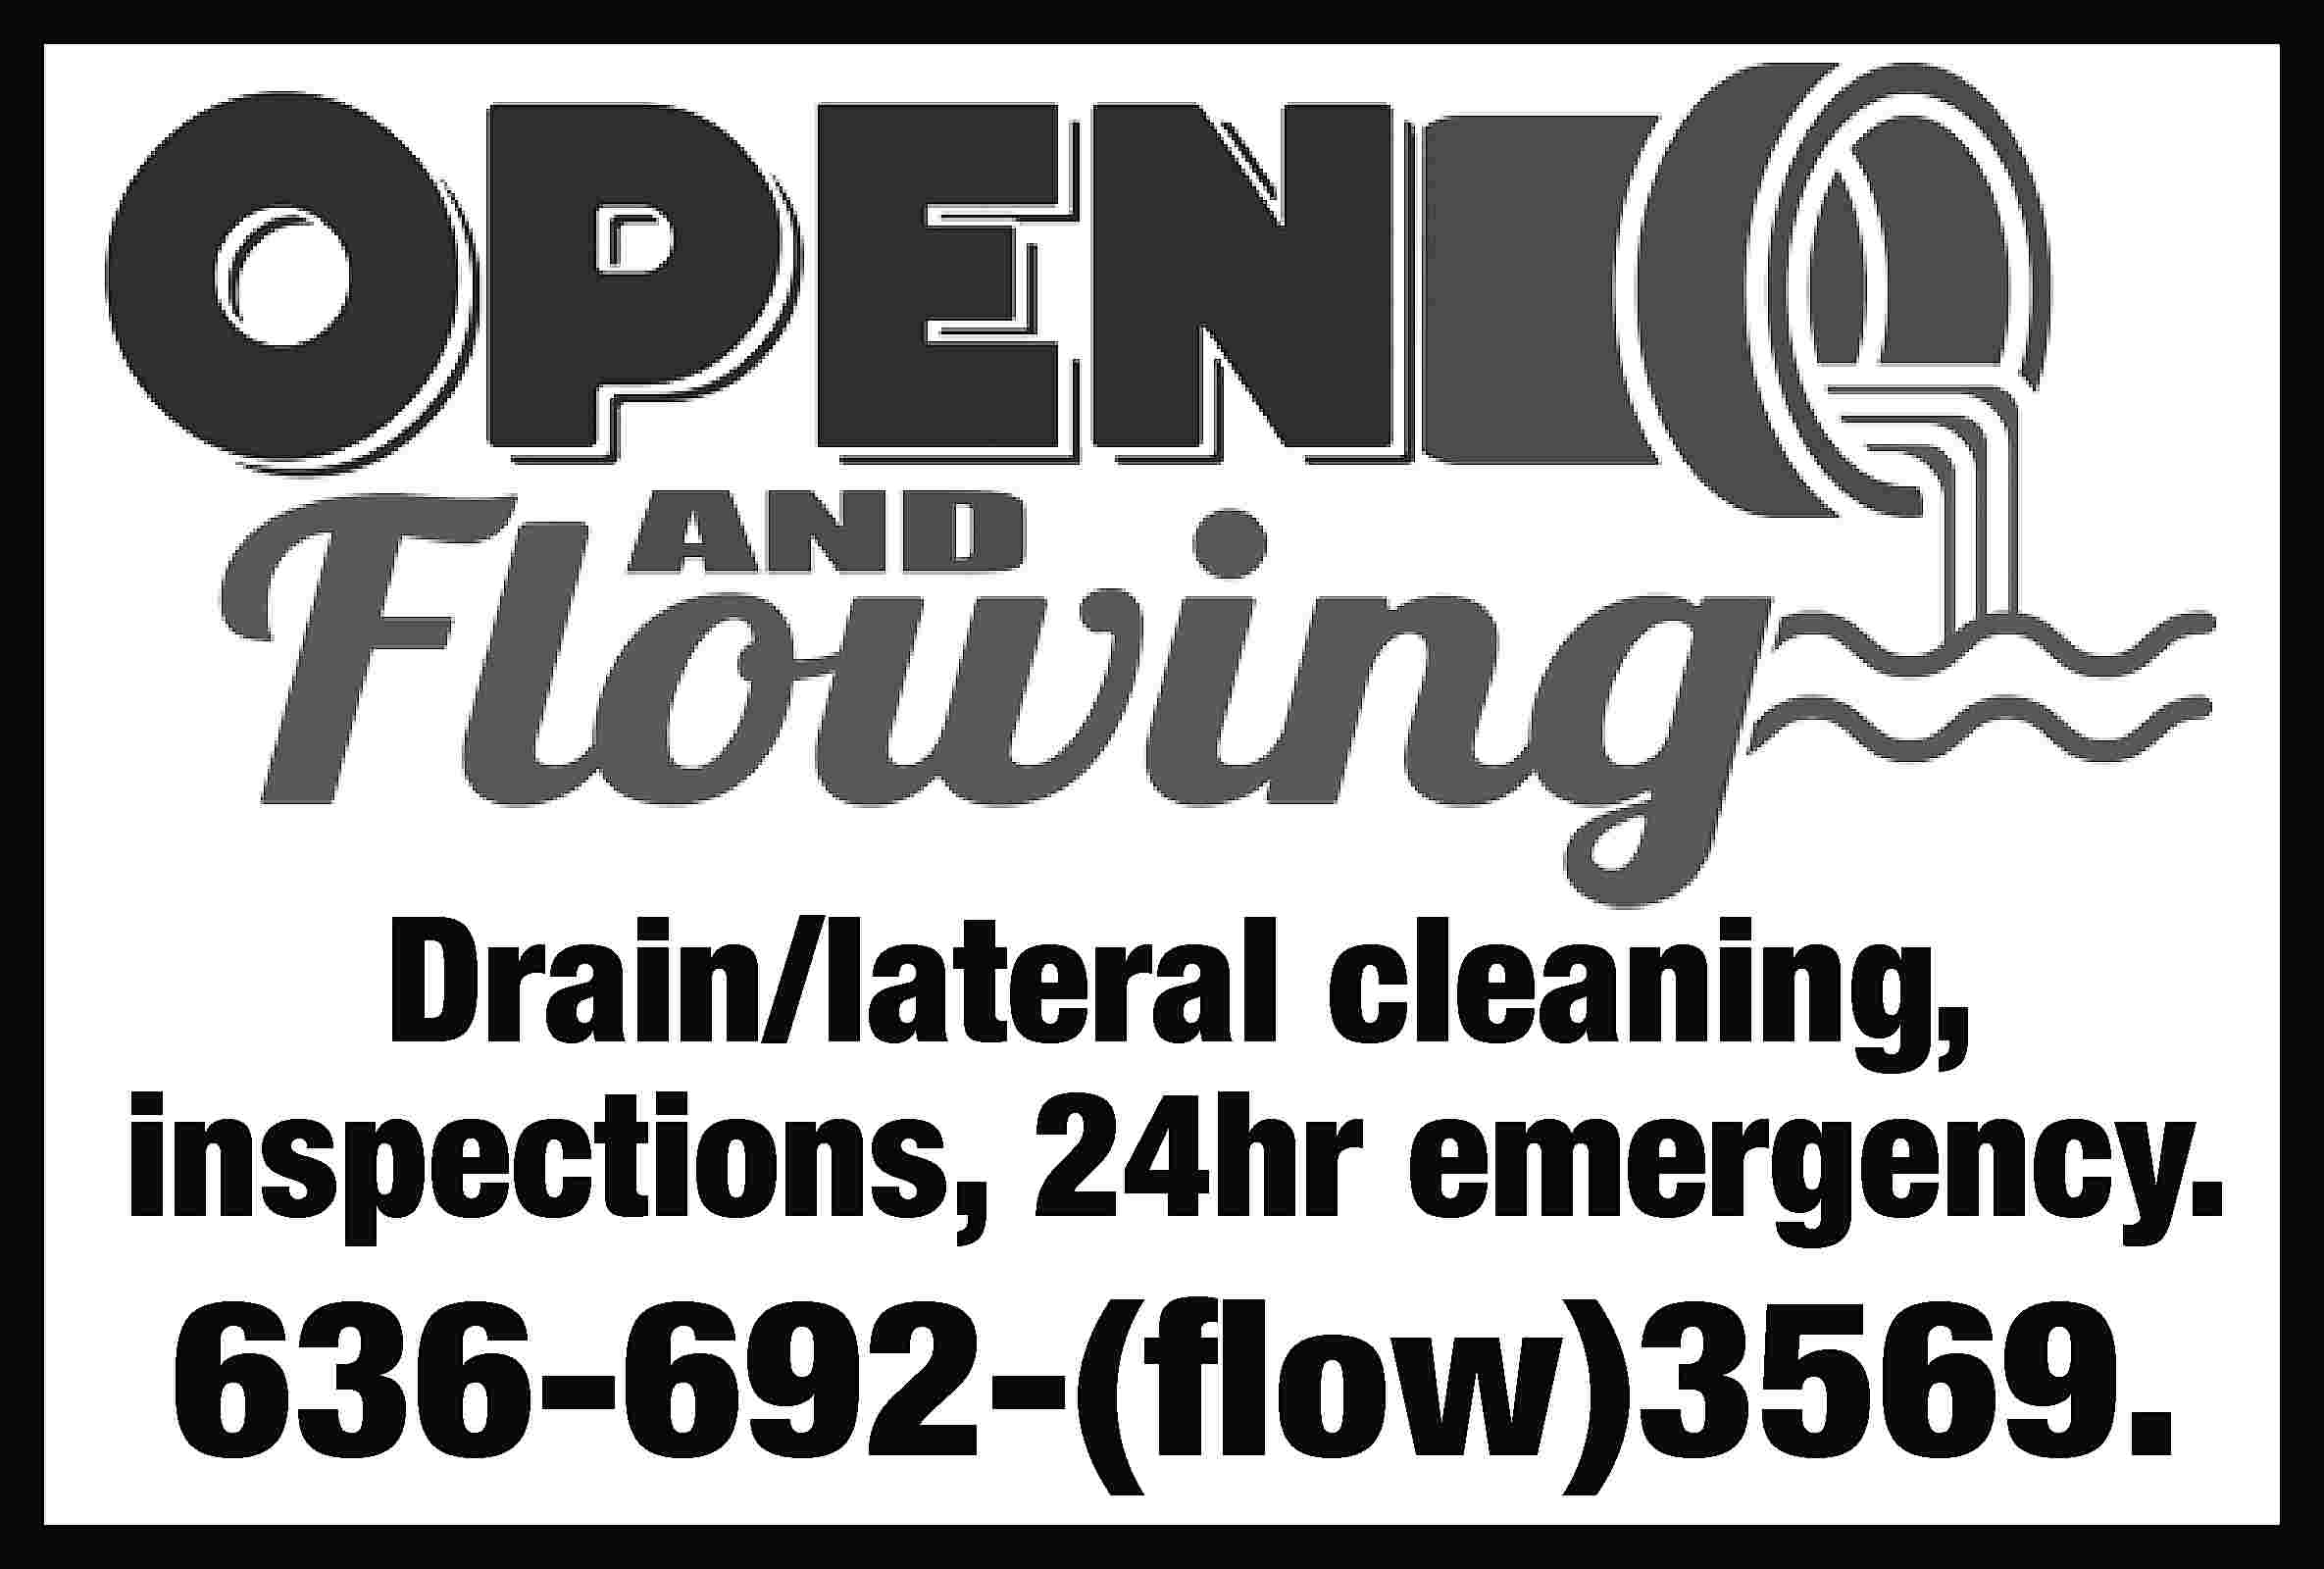 Drain/lateral cleaning, inspections, 24hr emergency.  Drain/lateral cleaning, inspections, 24hr emergency. 636-692-(flow)3569.